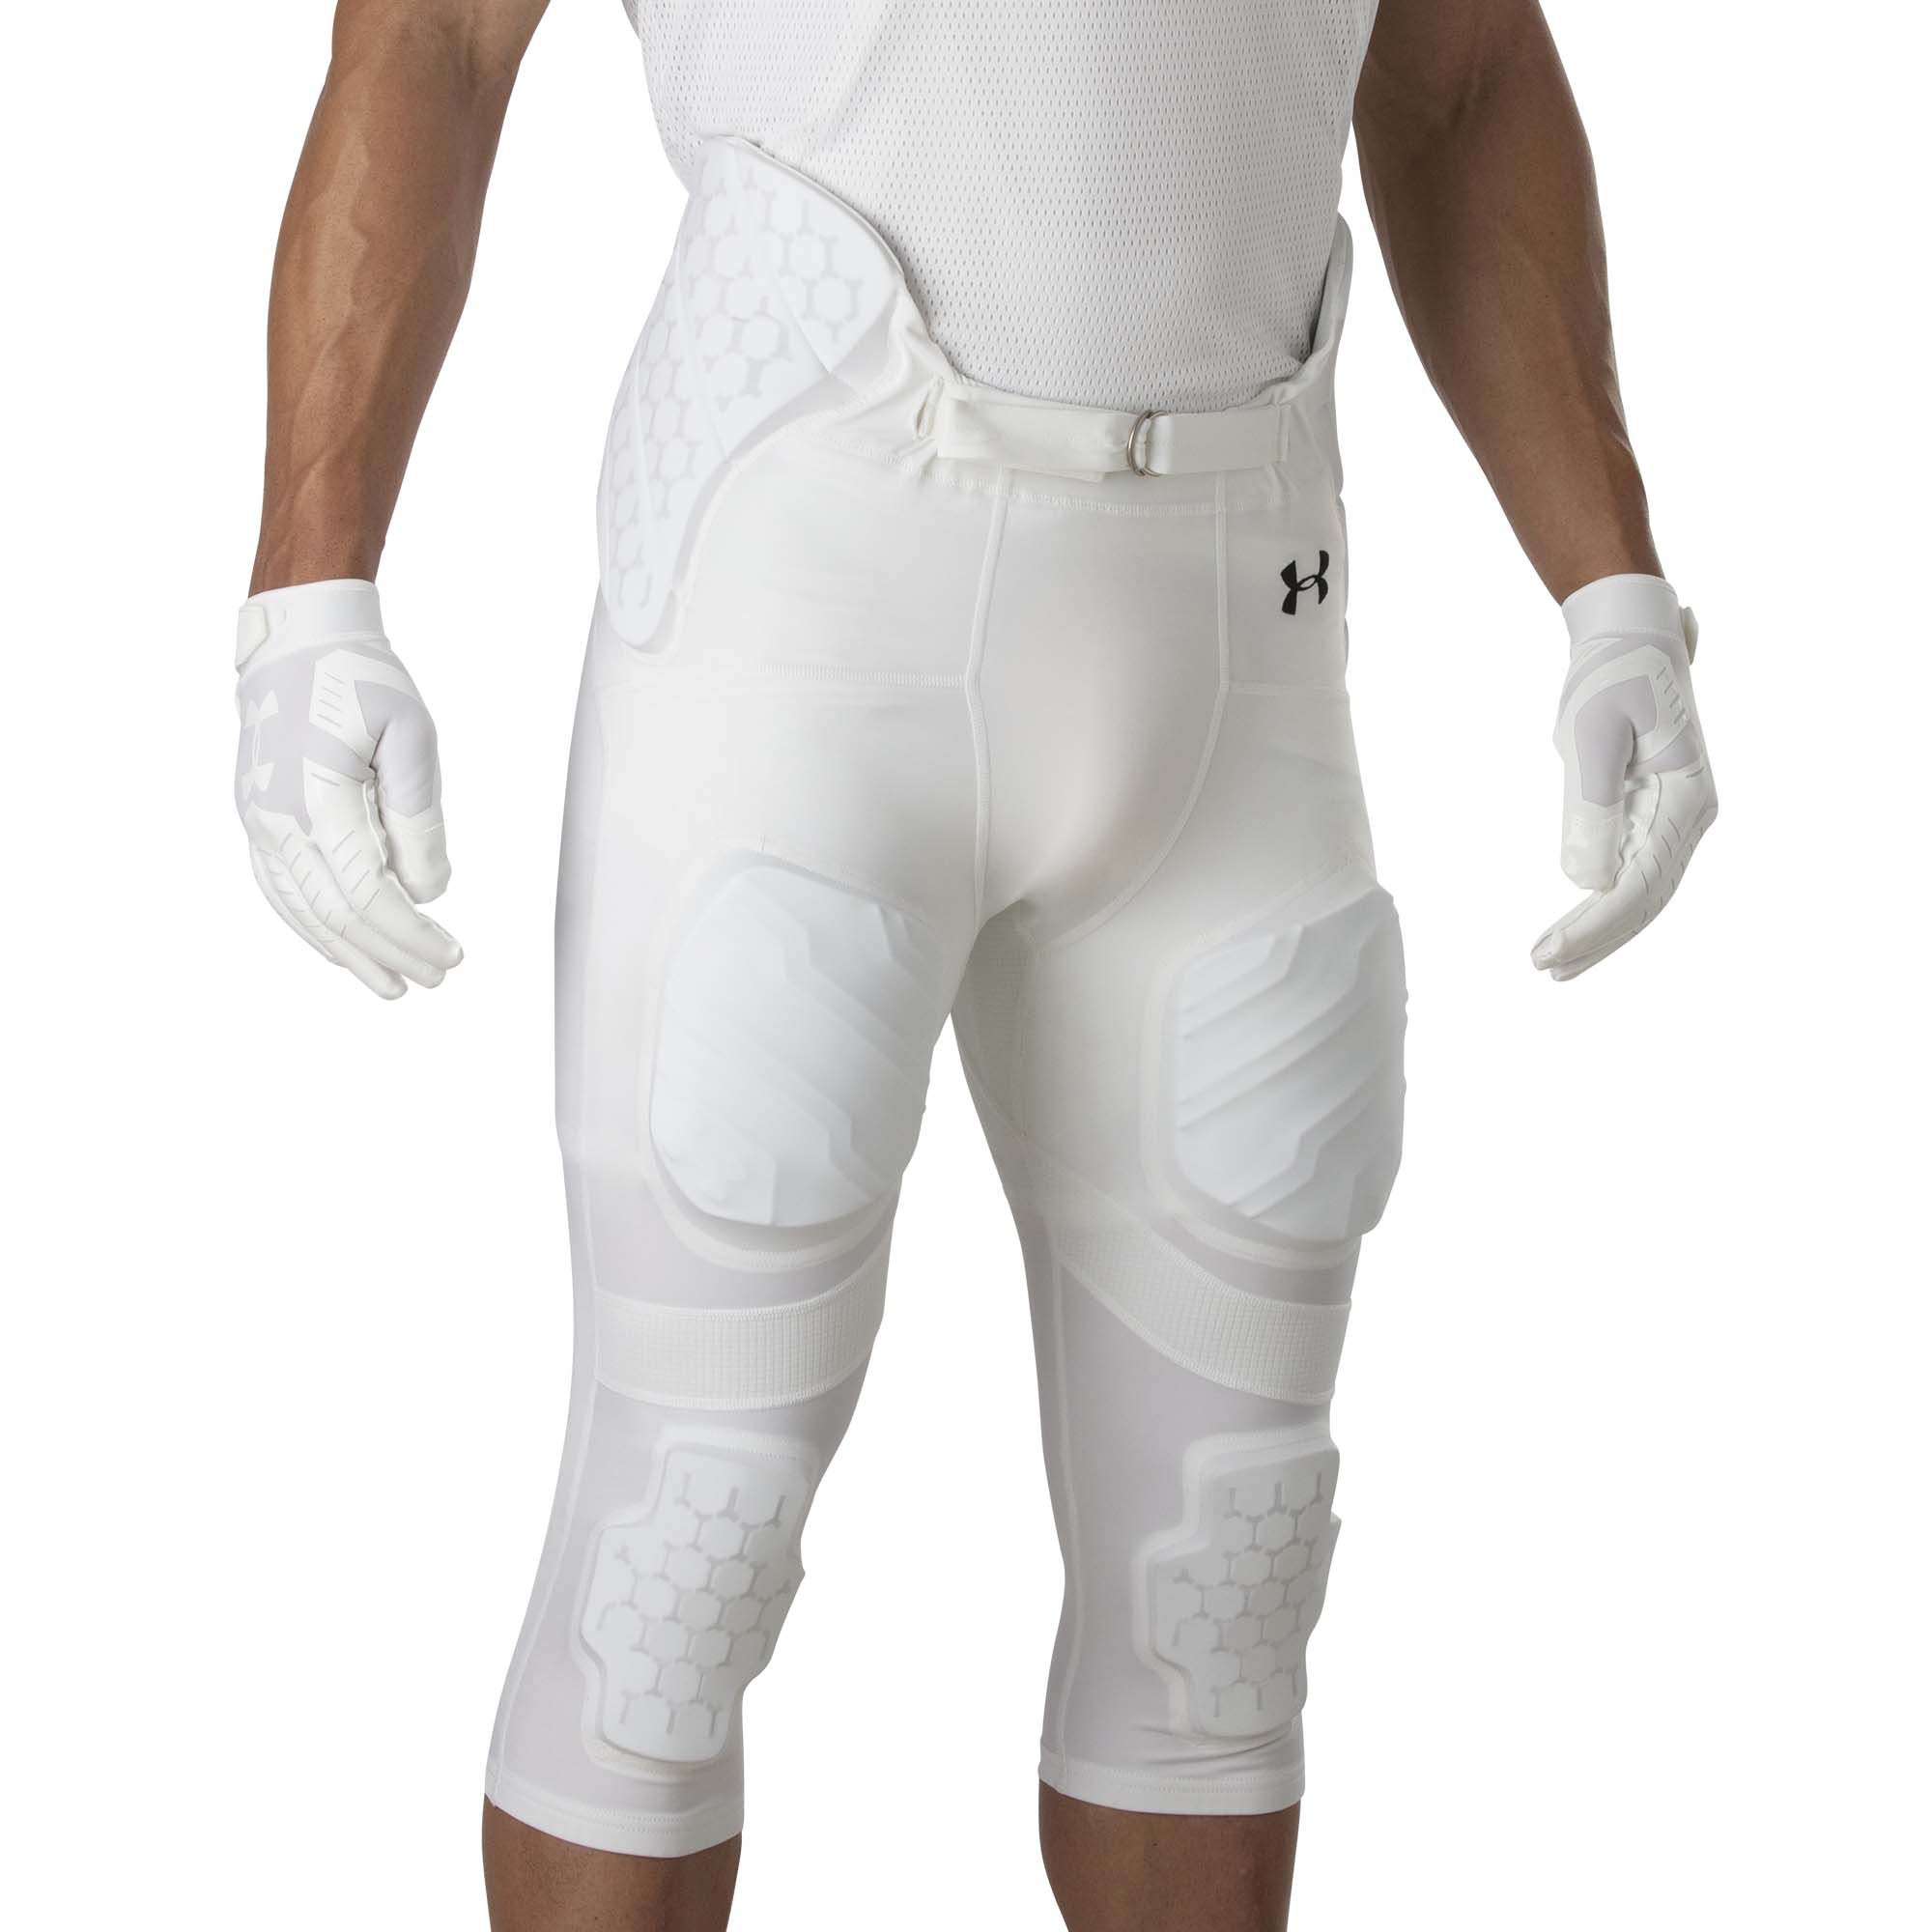 Under Armour - UFPPM1 Adult Integrated Football Pant with pads and